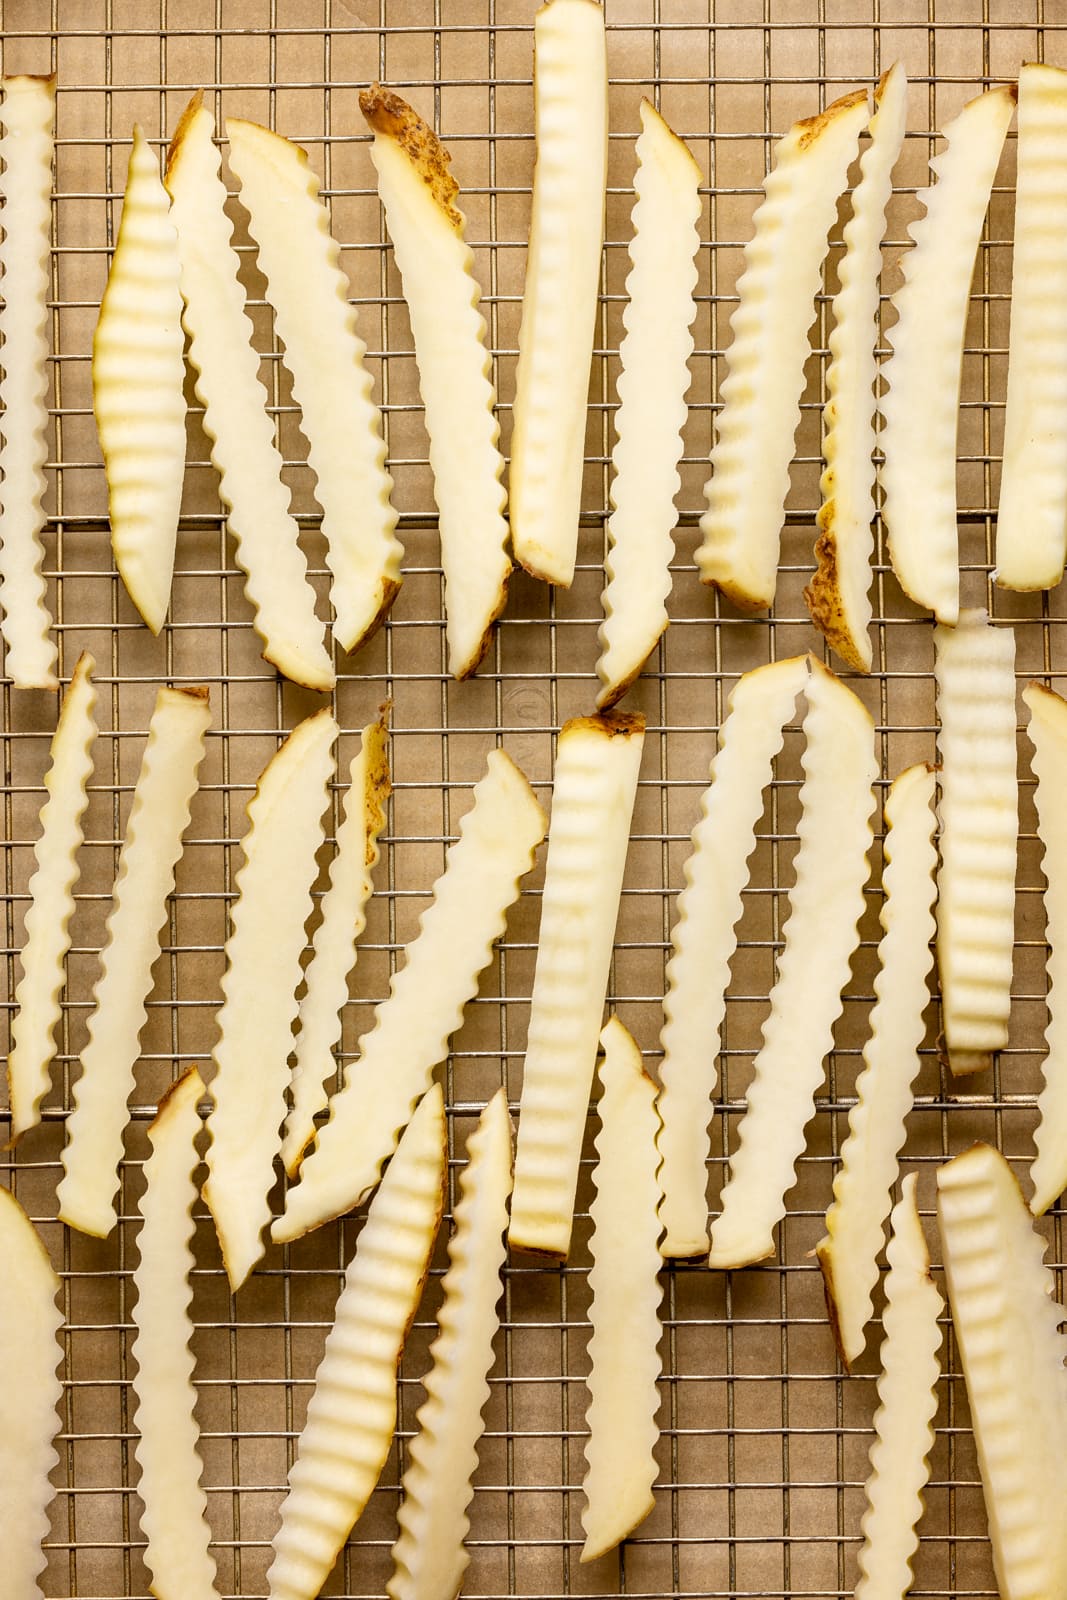 Fries cut in a crinkled shape lined side by side on a large baking sheet with parchment paper.